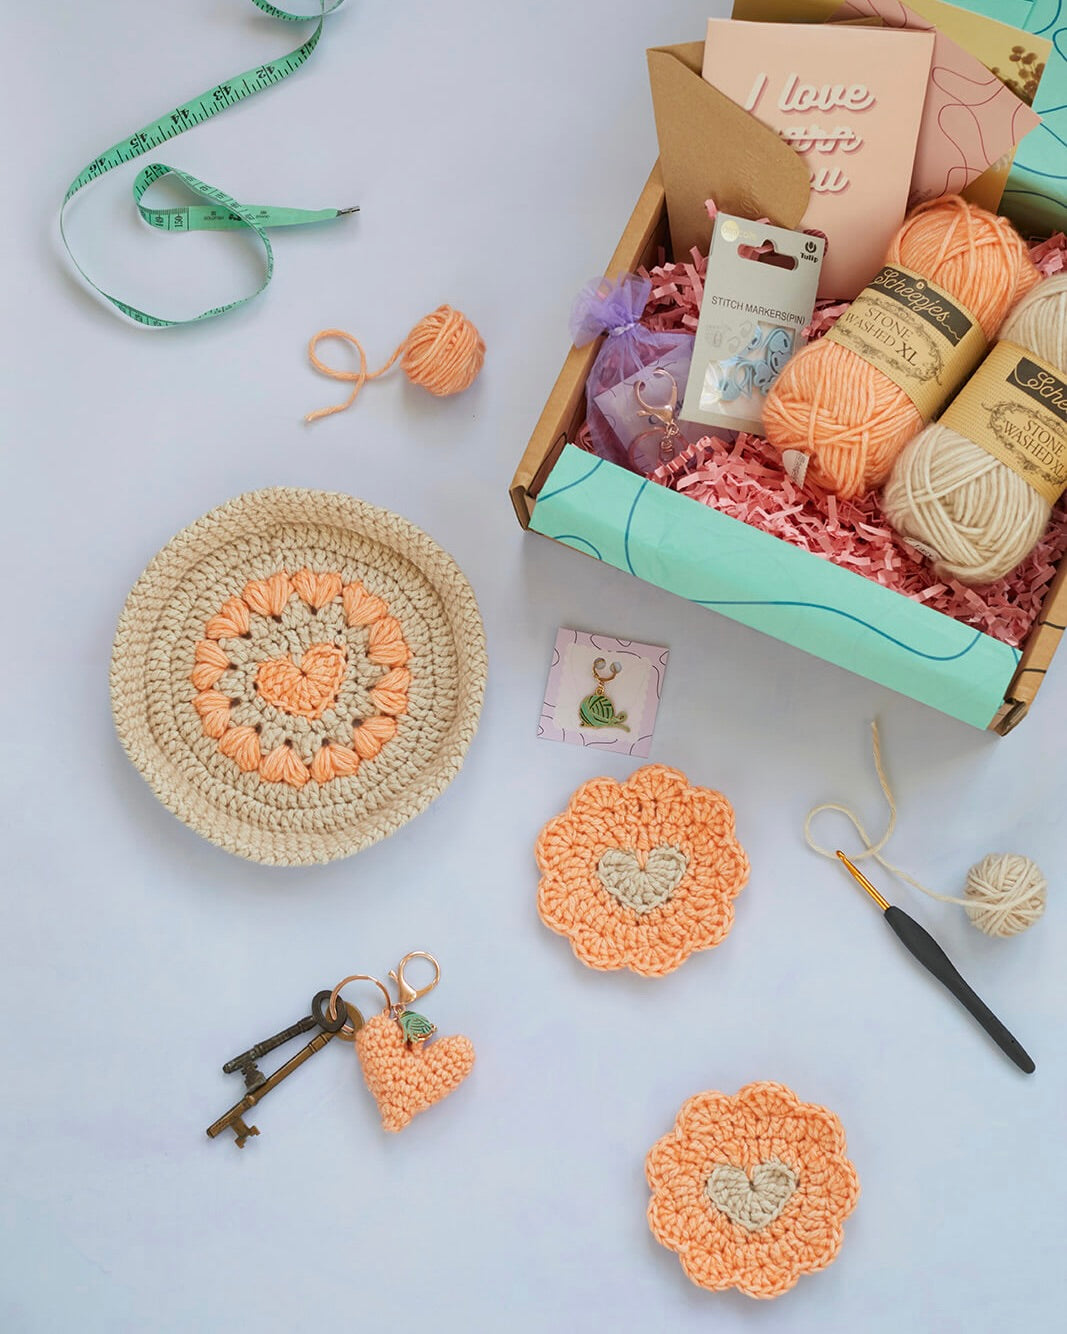 Curate Crochet Box - Monthly Subscription